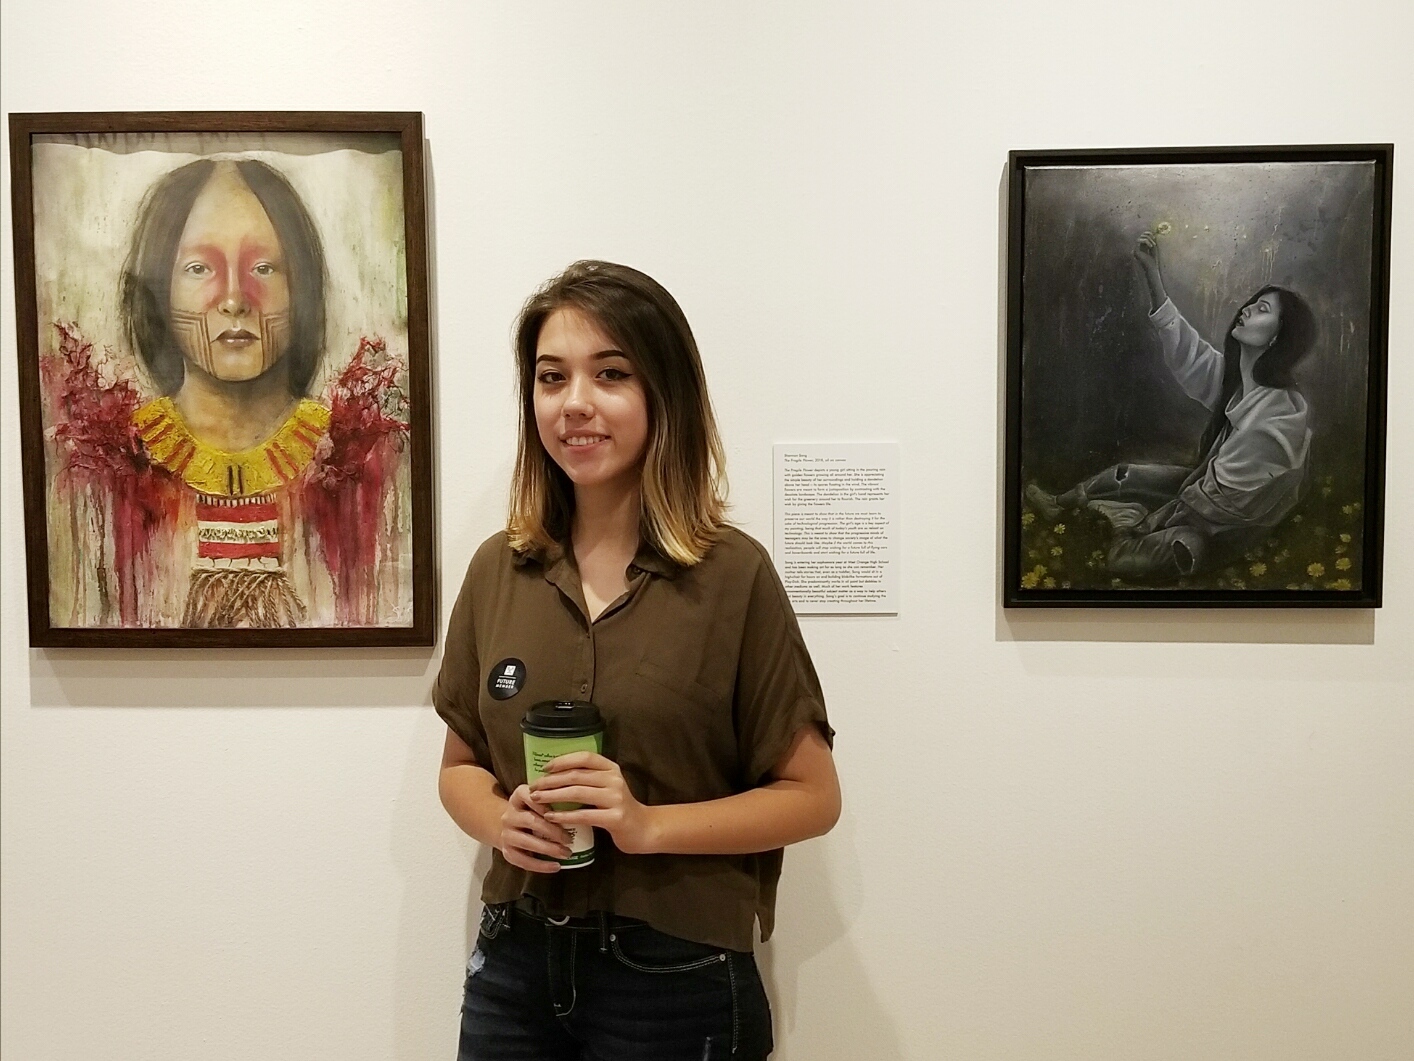 Shannon Song earned a first-place honor in the juried American Youth: “Our Future” art exhibition at the Mennello Museum of American Art, in Orlando. She has two paintings on display there through Oct. 7.